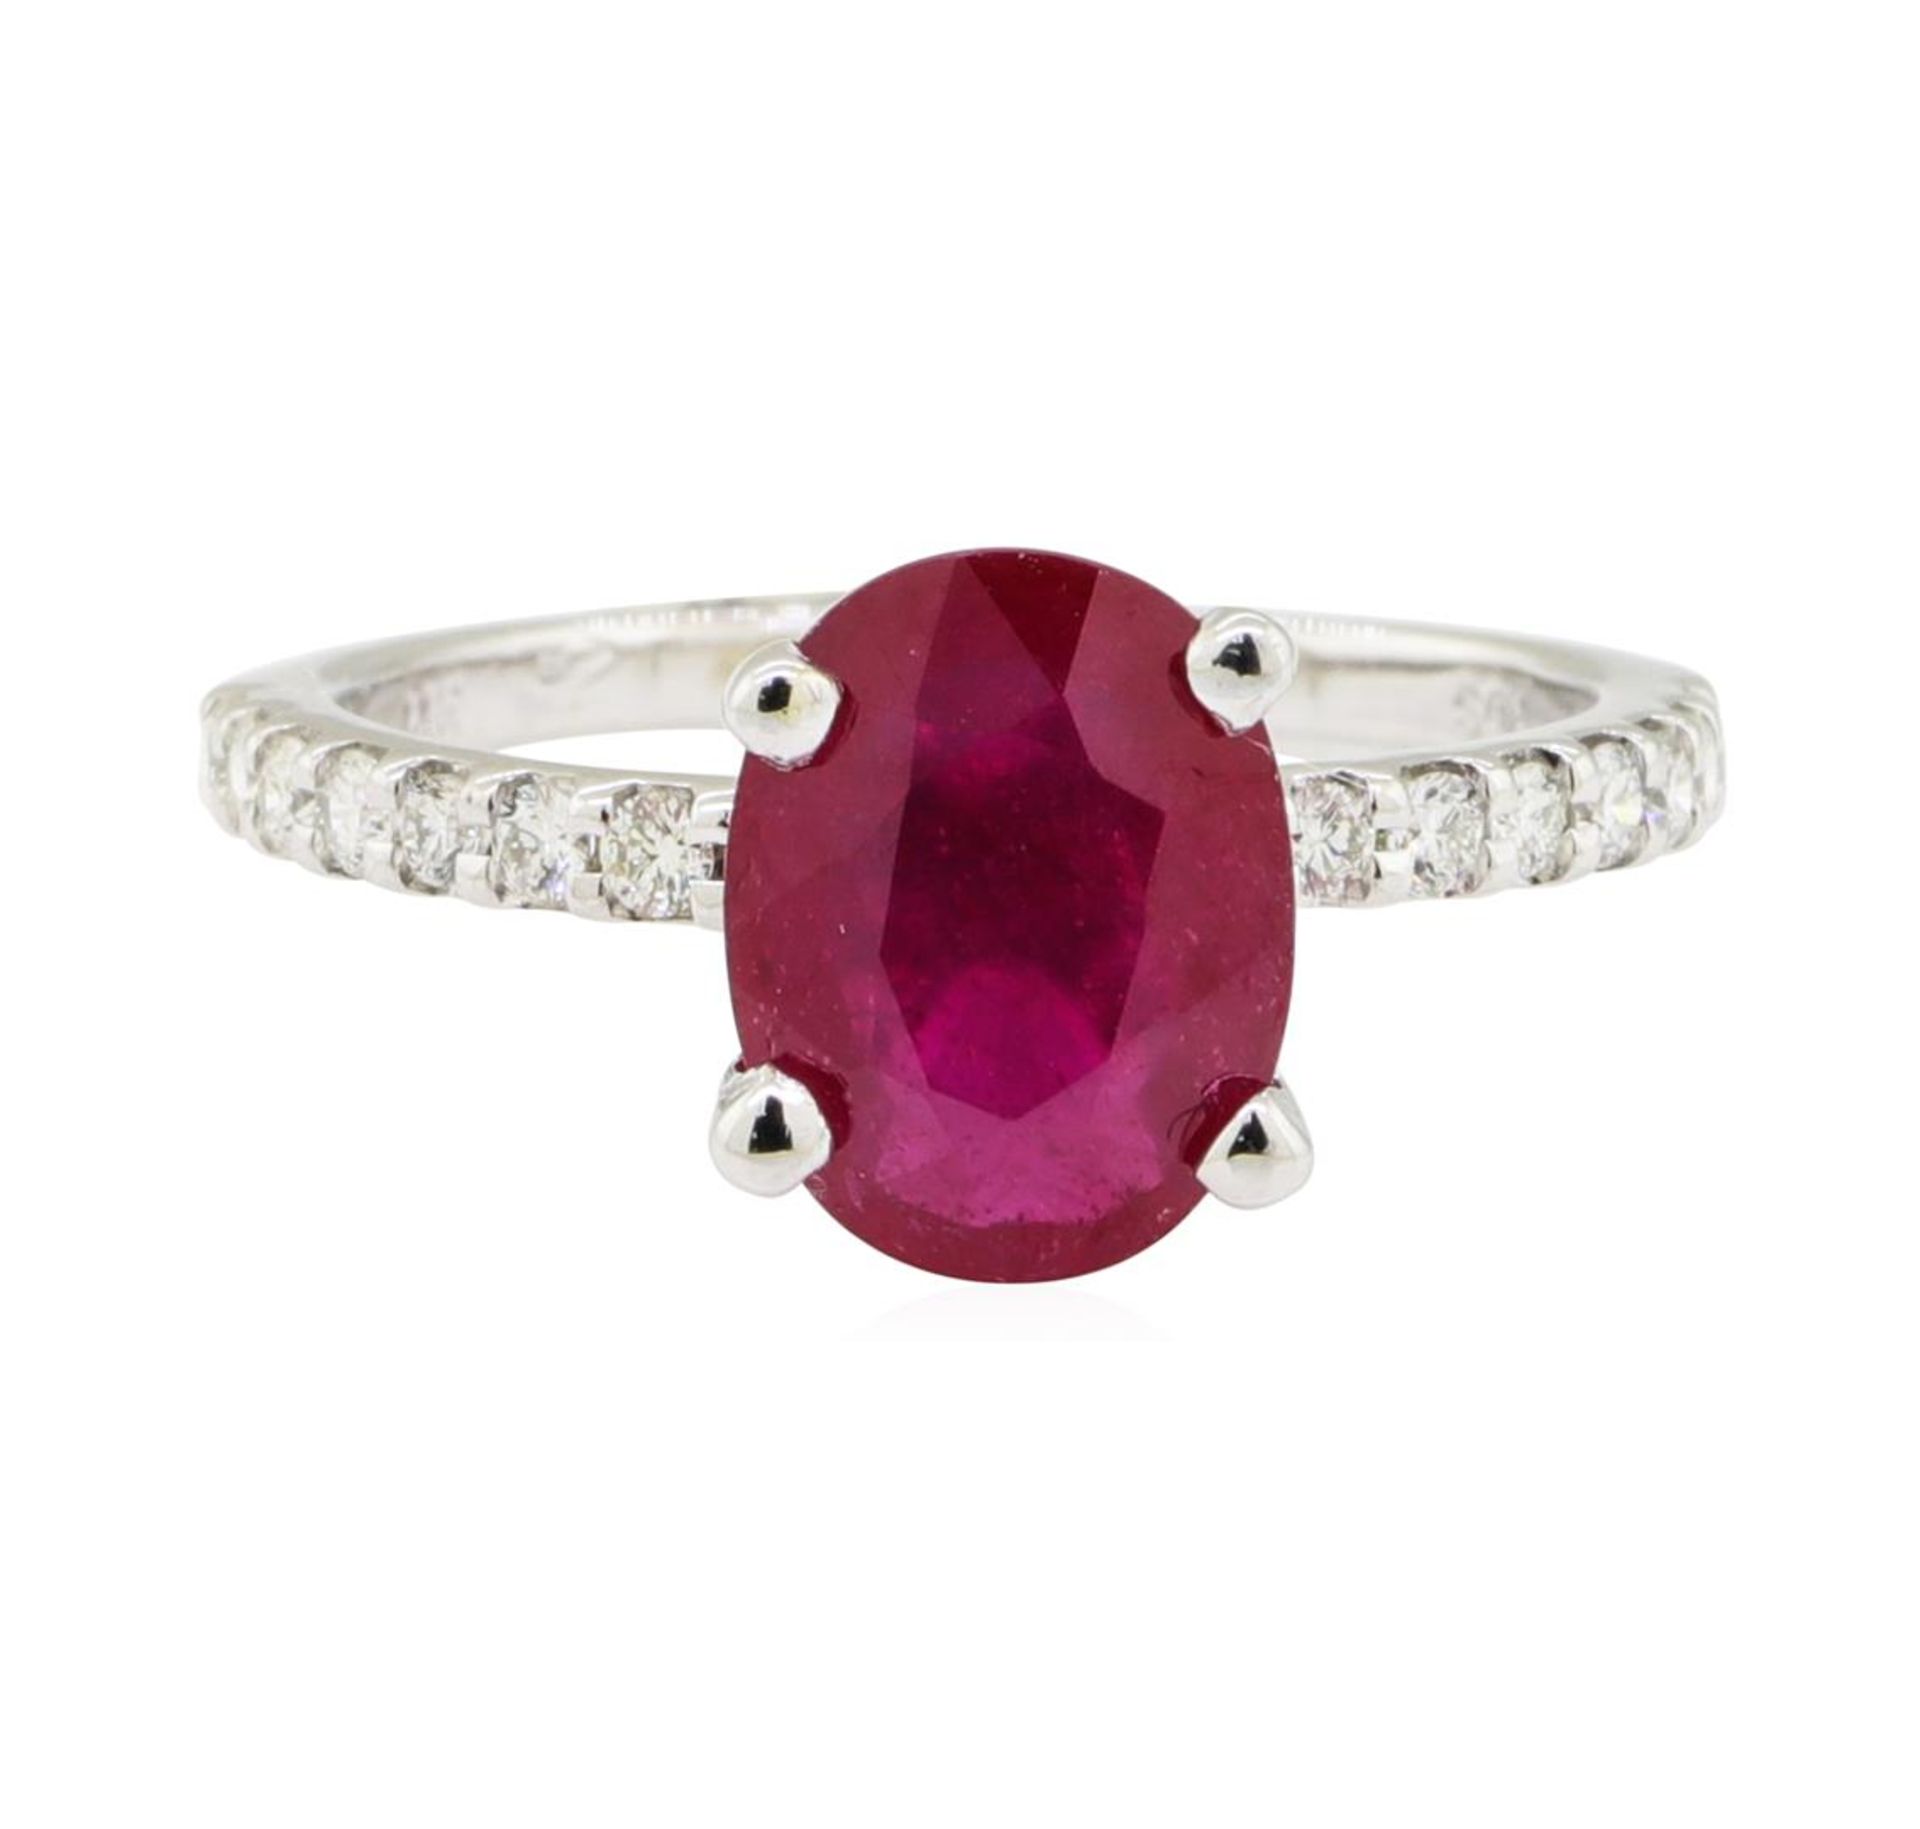 2.38ctw Glass Filled Natural Ruby and Diamond Ring - 14KT White Gold - Image 2 of 4